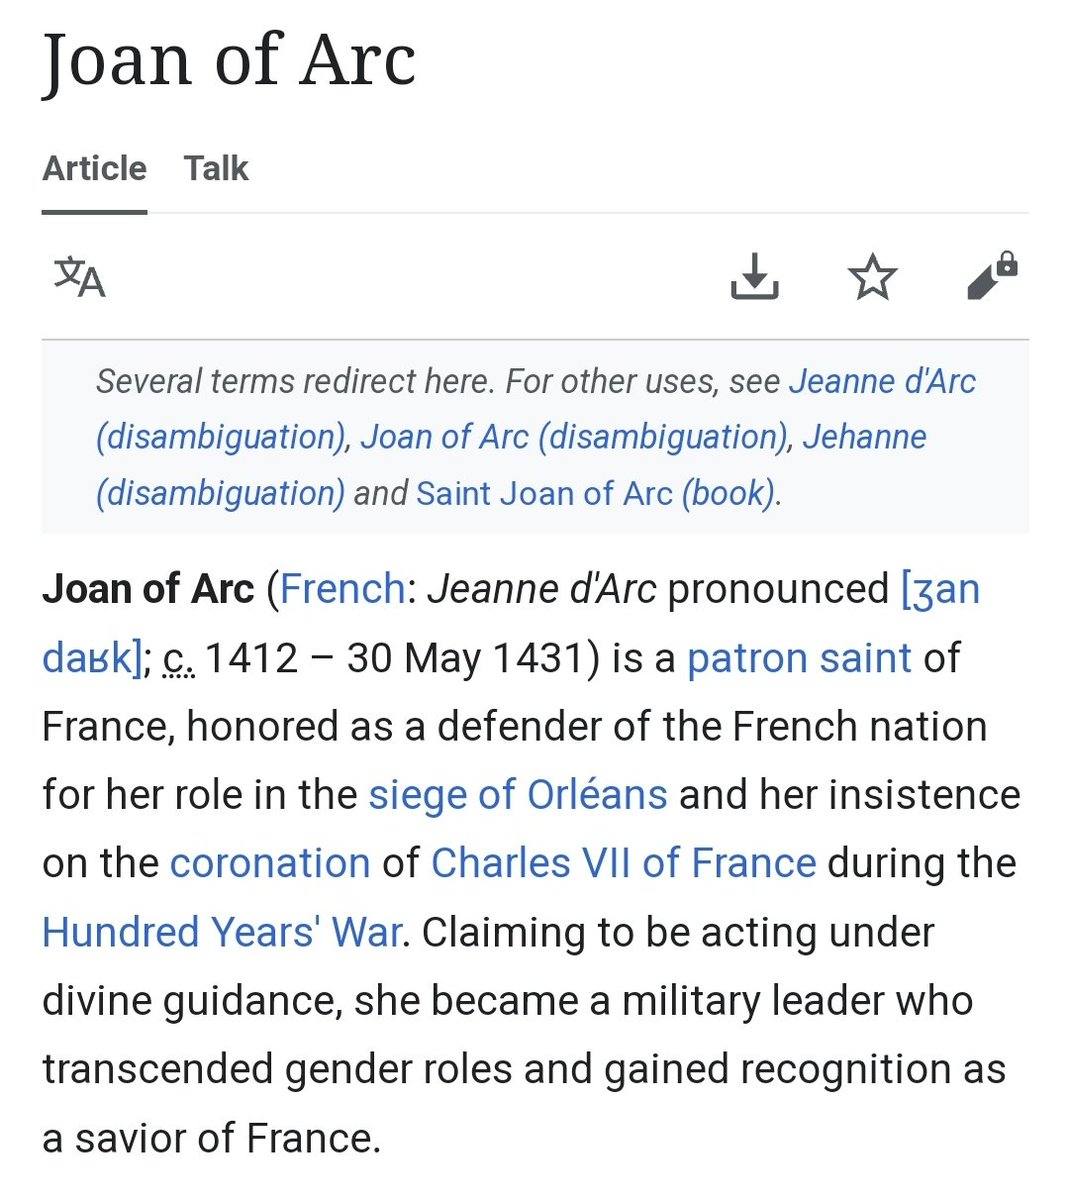 Today is Saint Jennifer/Jeanne in france...it is also the anniversary of the murder of #JoanOfArc, one of history's greatest martyrs 🕯 🙏 🕊 ❤️ 
In her name I make this post
JEANNE D'ARC, spiritual & military genius, burnt at the stake on 05/30/1431 
#WeDoNotForget
#Sacrifice